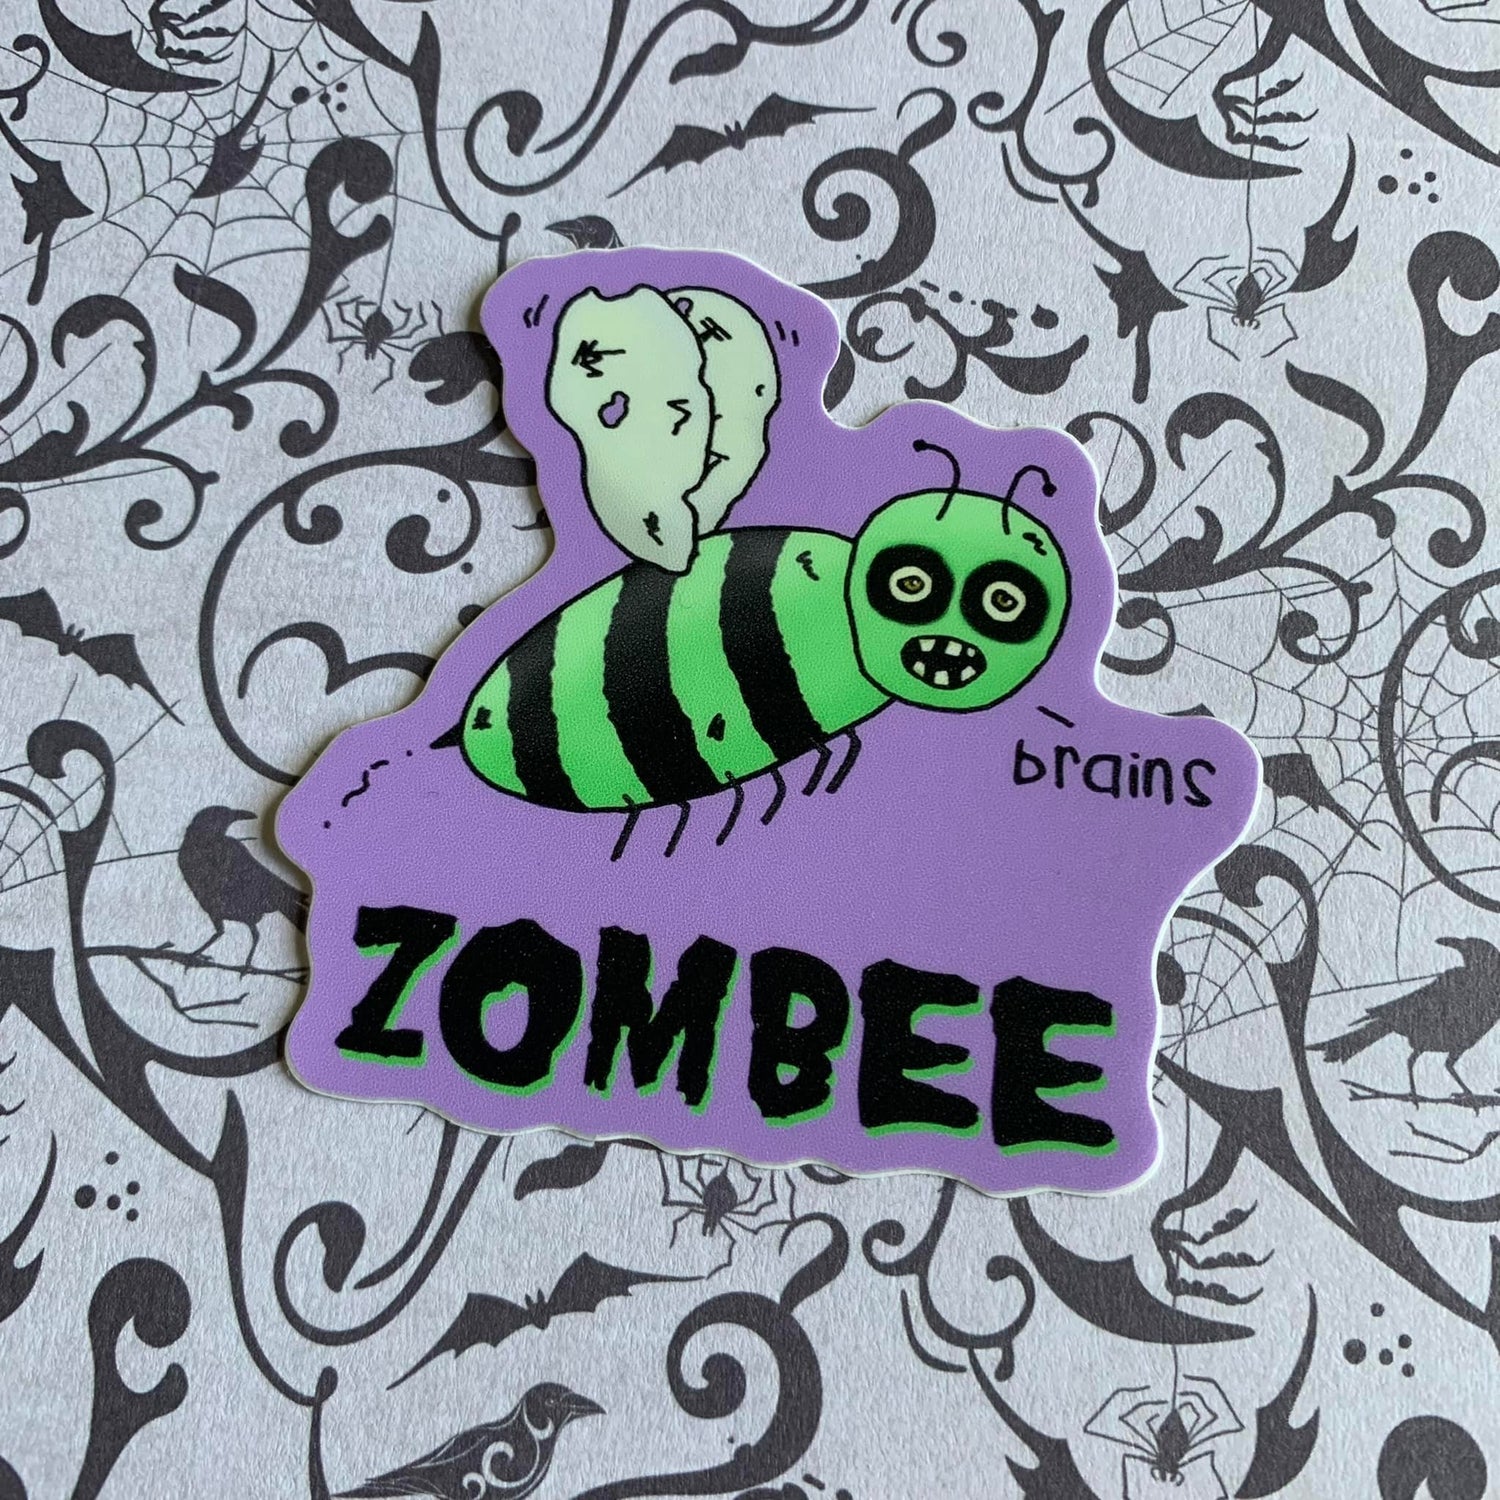 A photo of a fun sticker. There's a green dishevelled cartoon bee on it. Text below reads 'Zombee.'